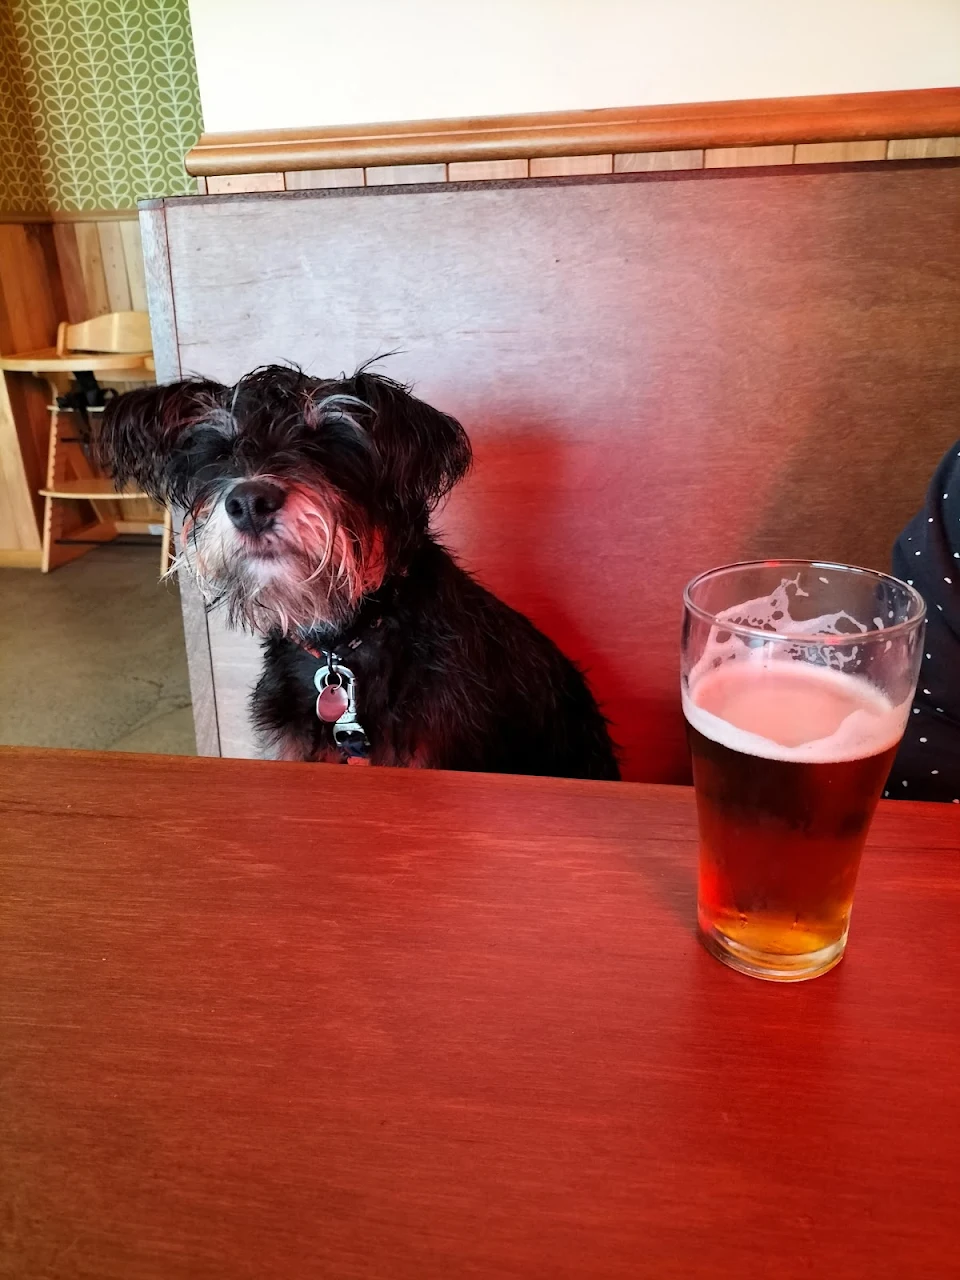 I bought my dog with me to the bar